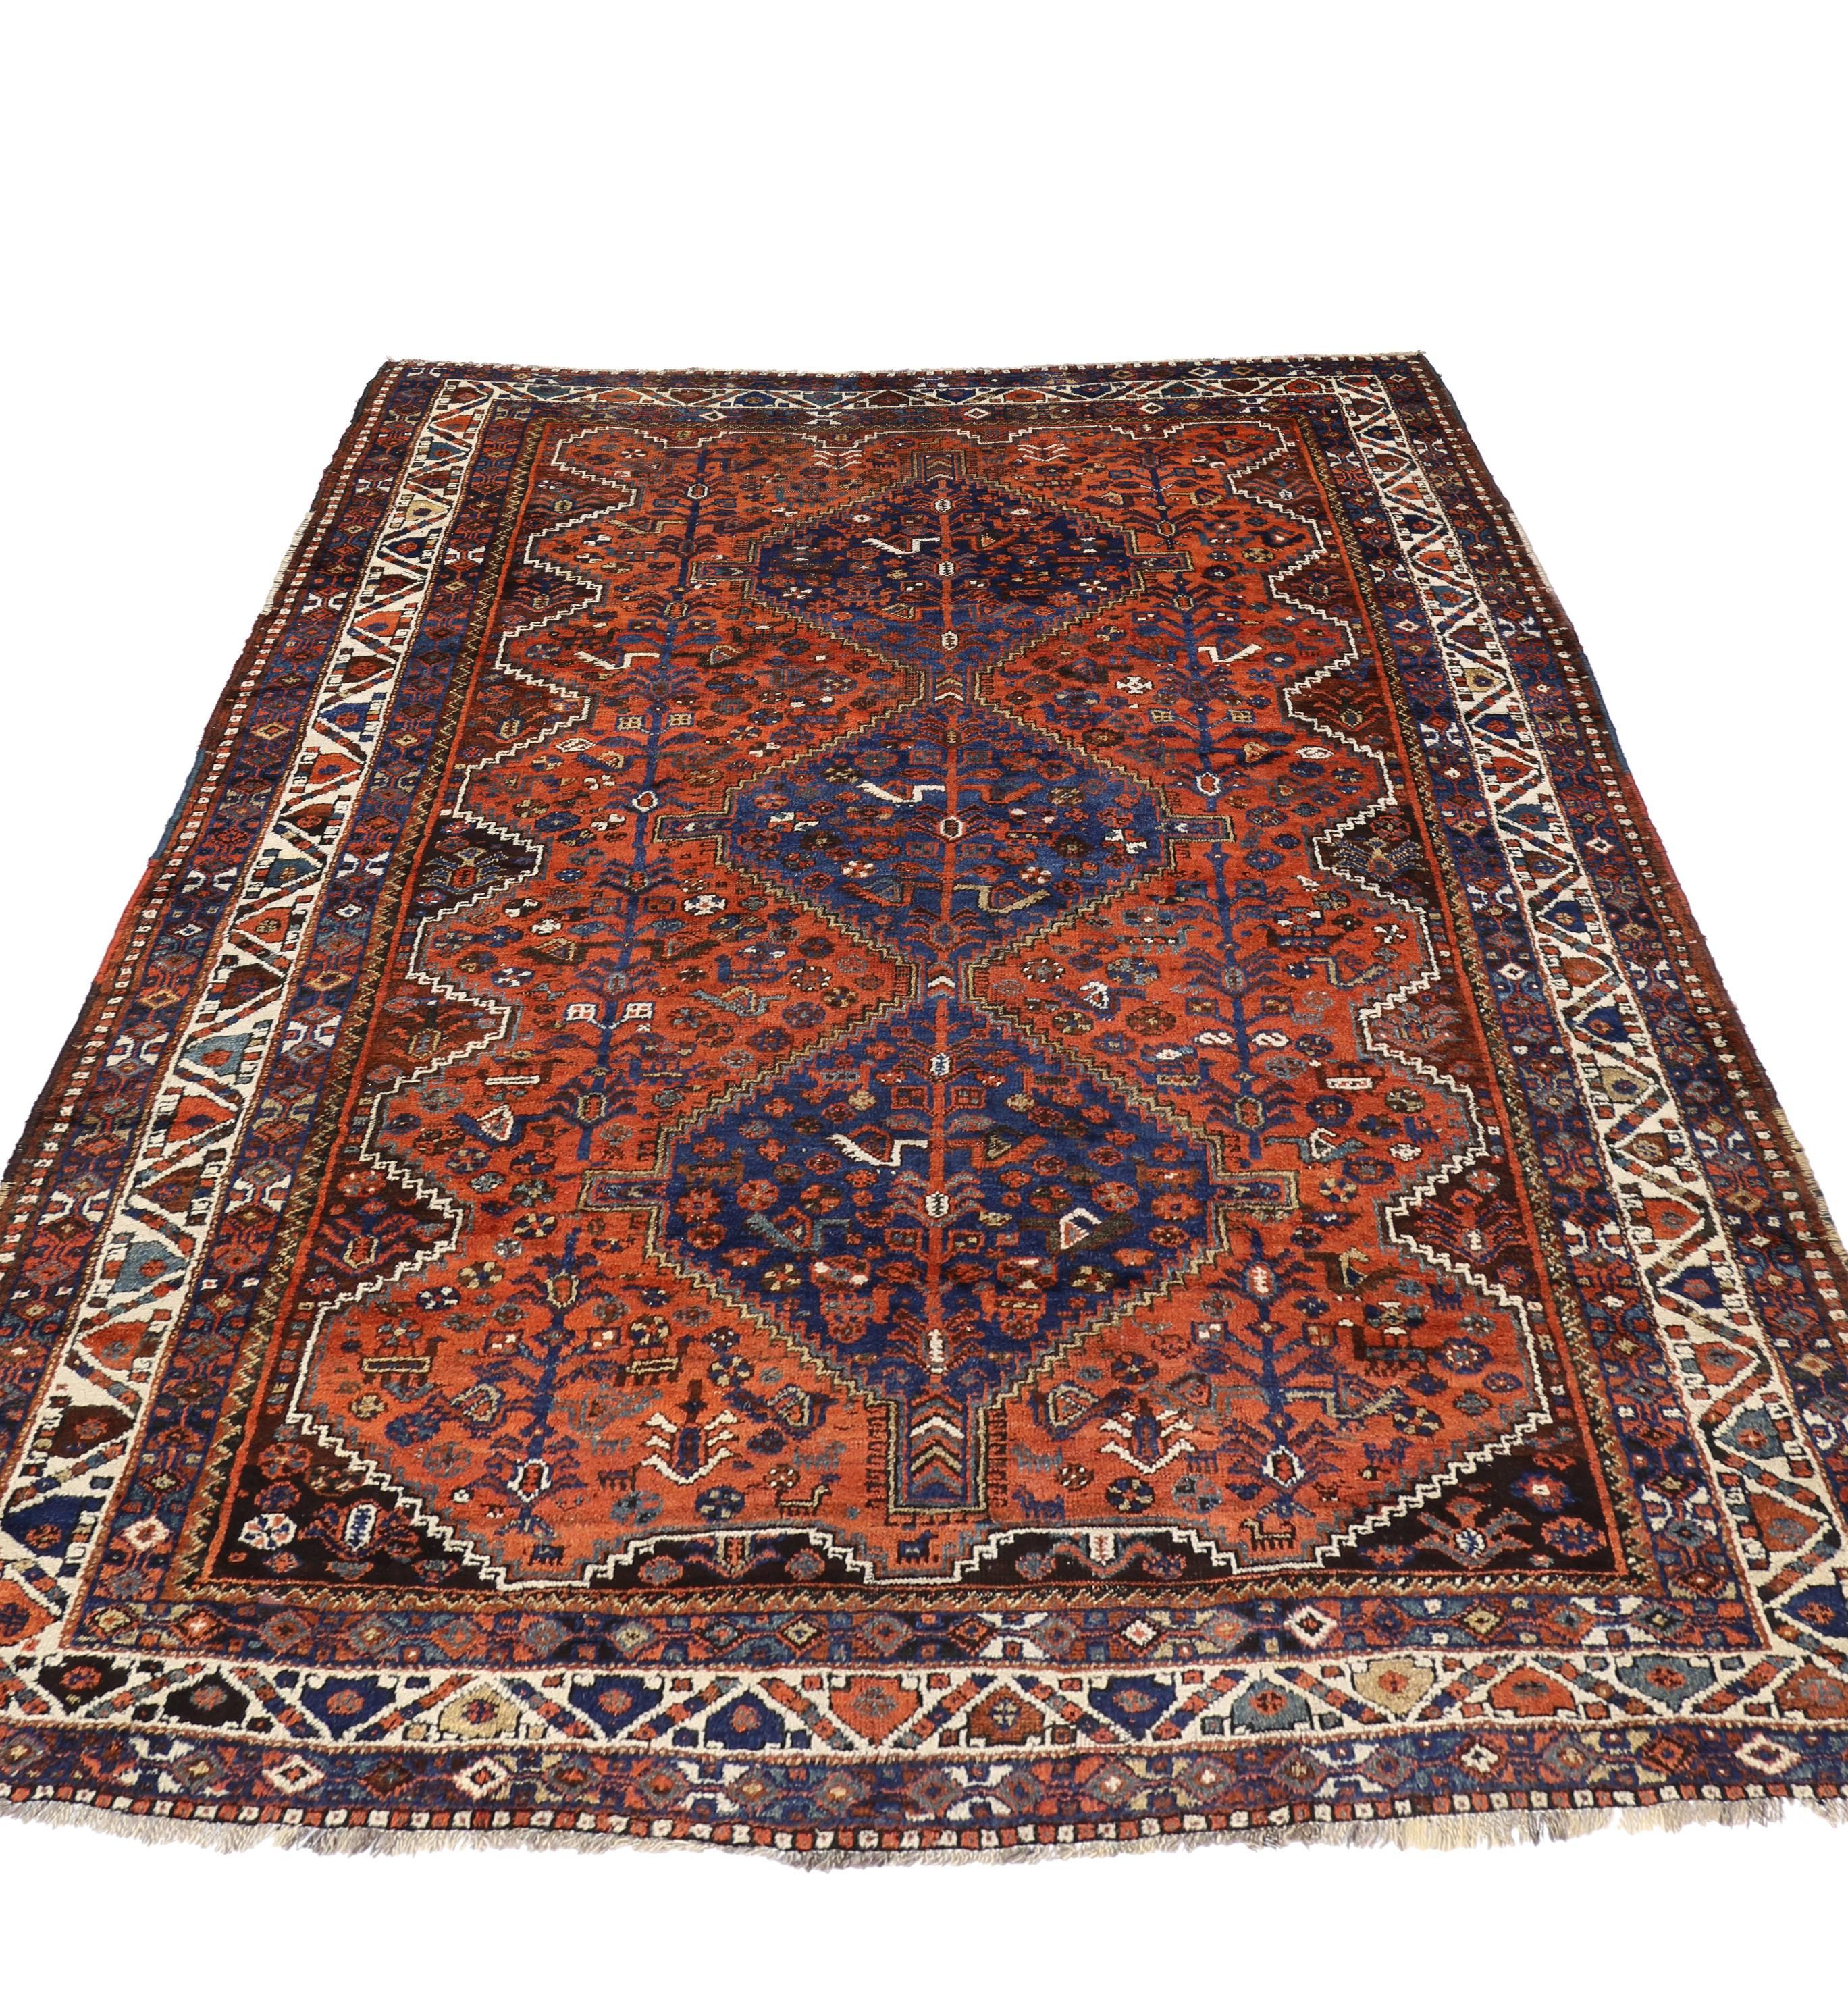 20th Century Antique Shiraz Persian Rug with Mid-Century Modern Tribal Style For Sale